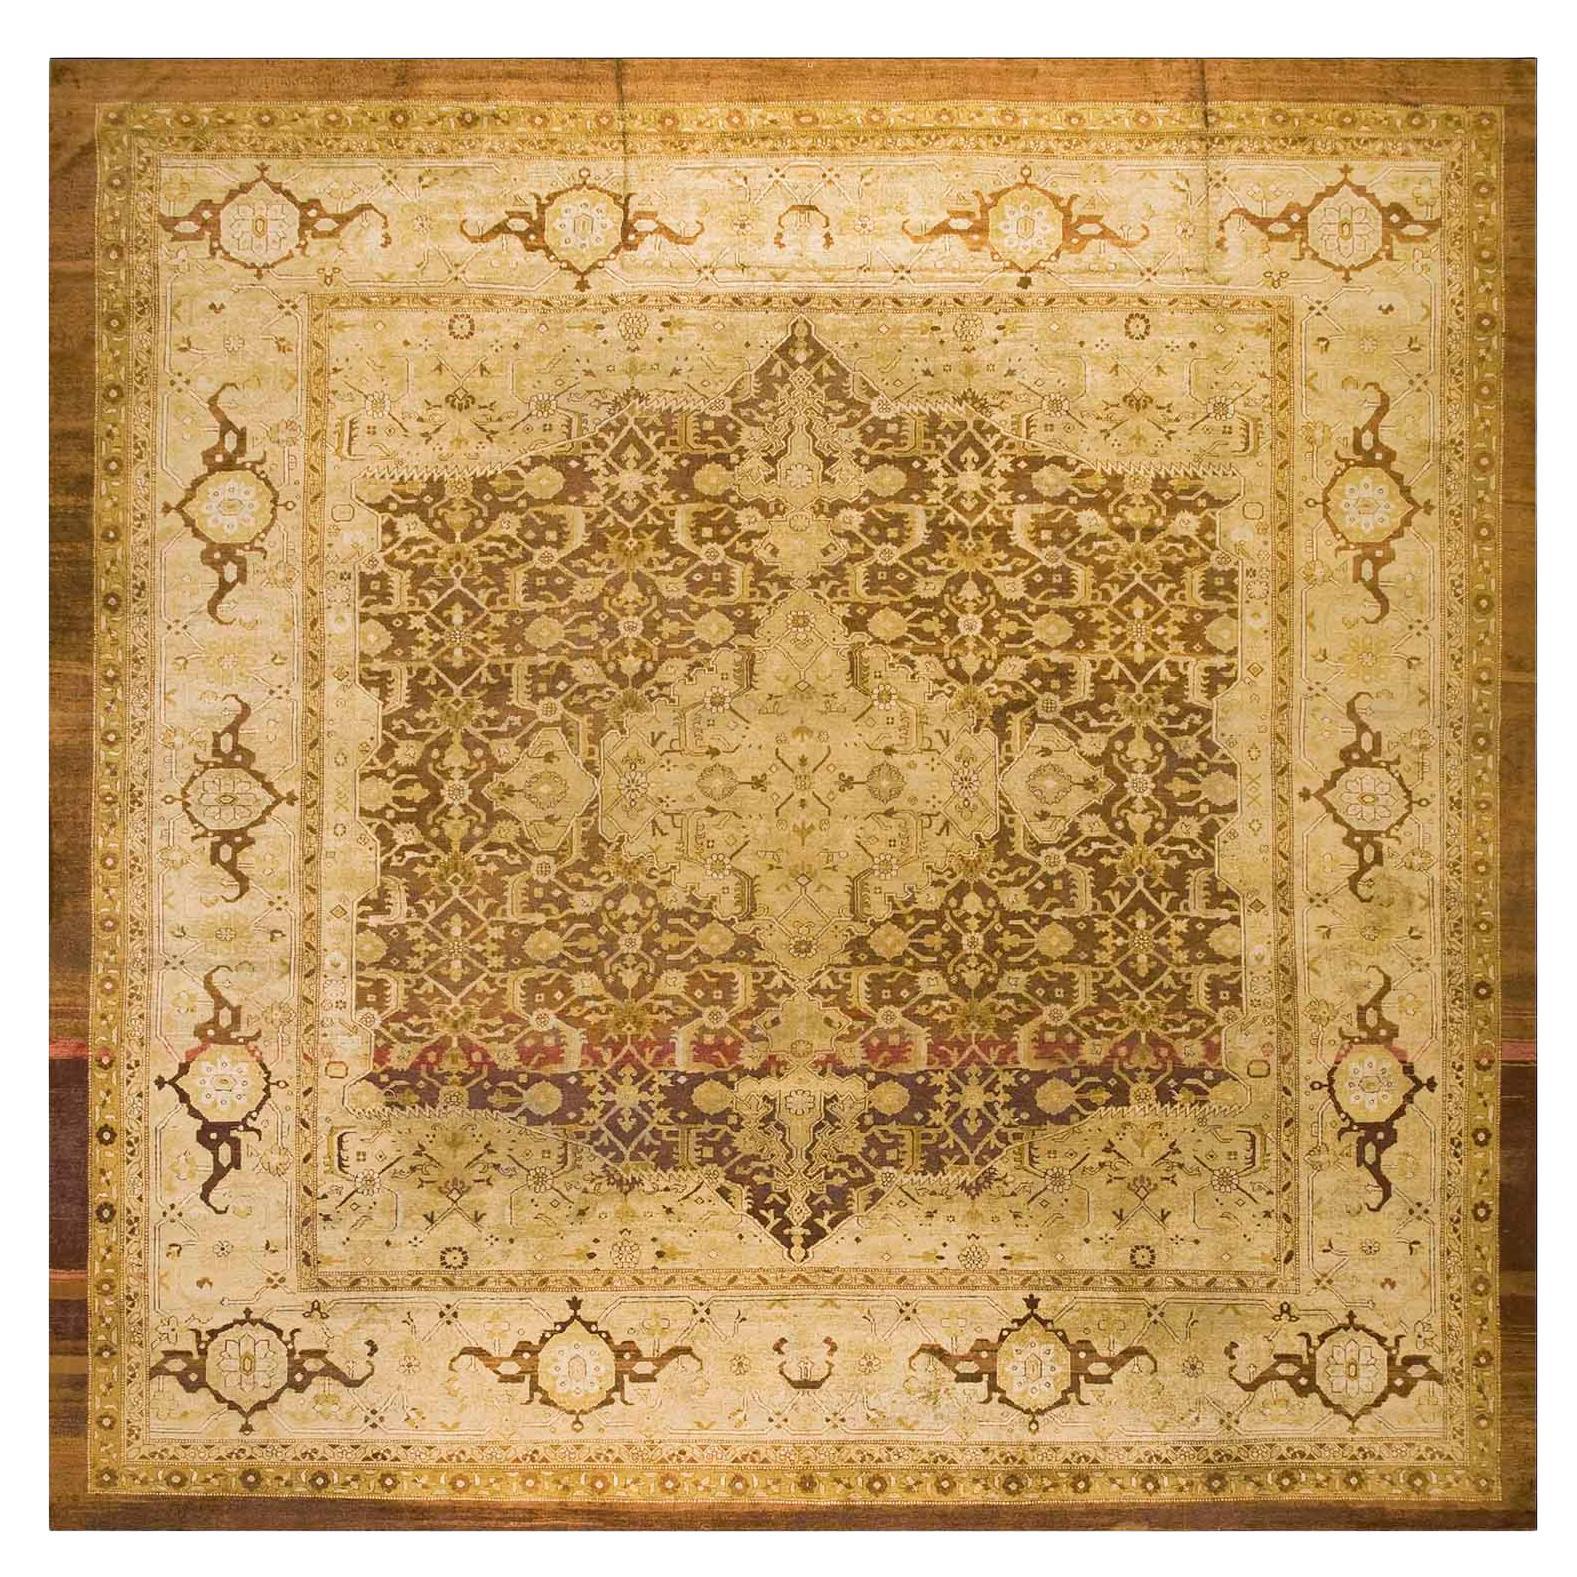 Early 20th Century N. Indian Agra Carpet ( 14' X 14' - 427 x 427 )